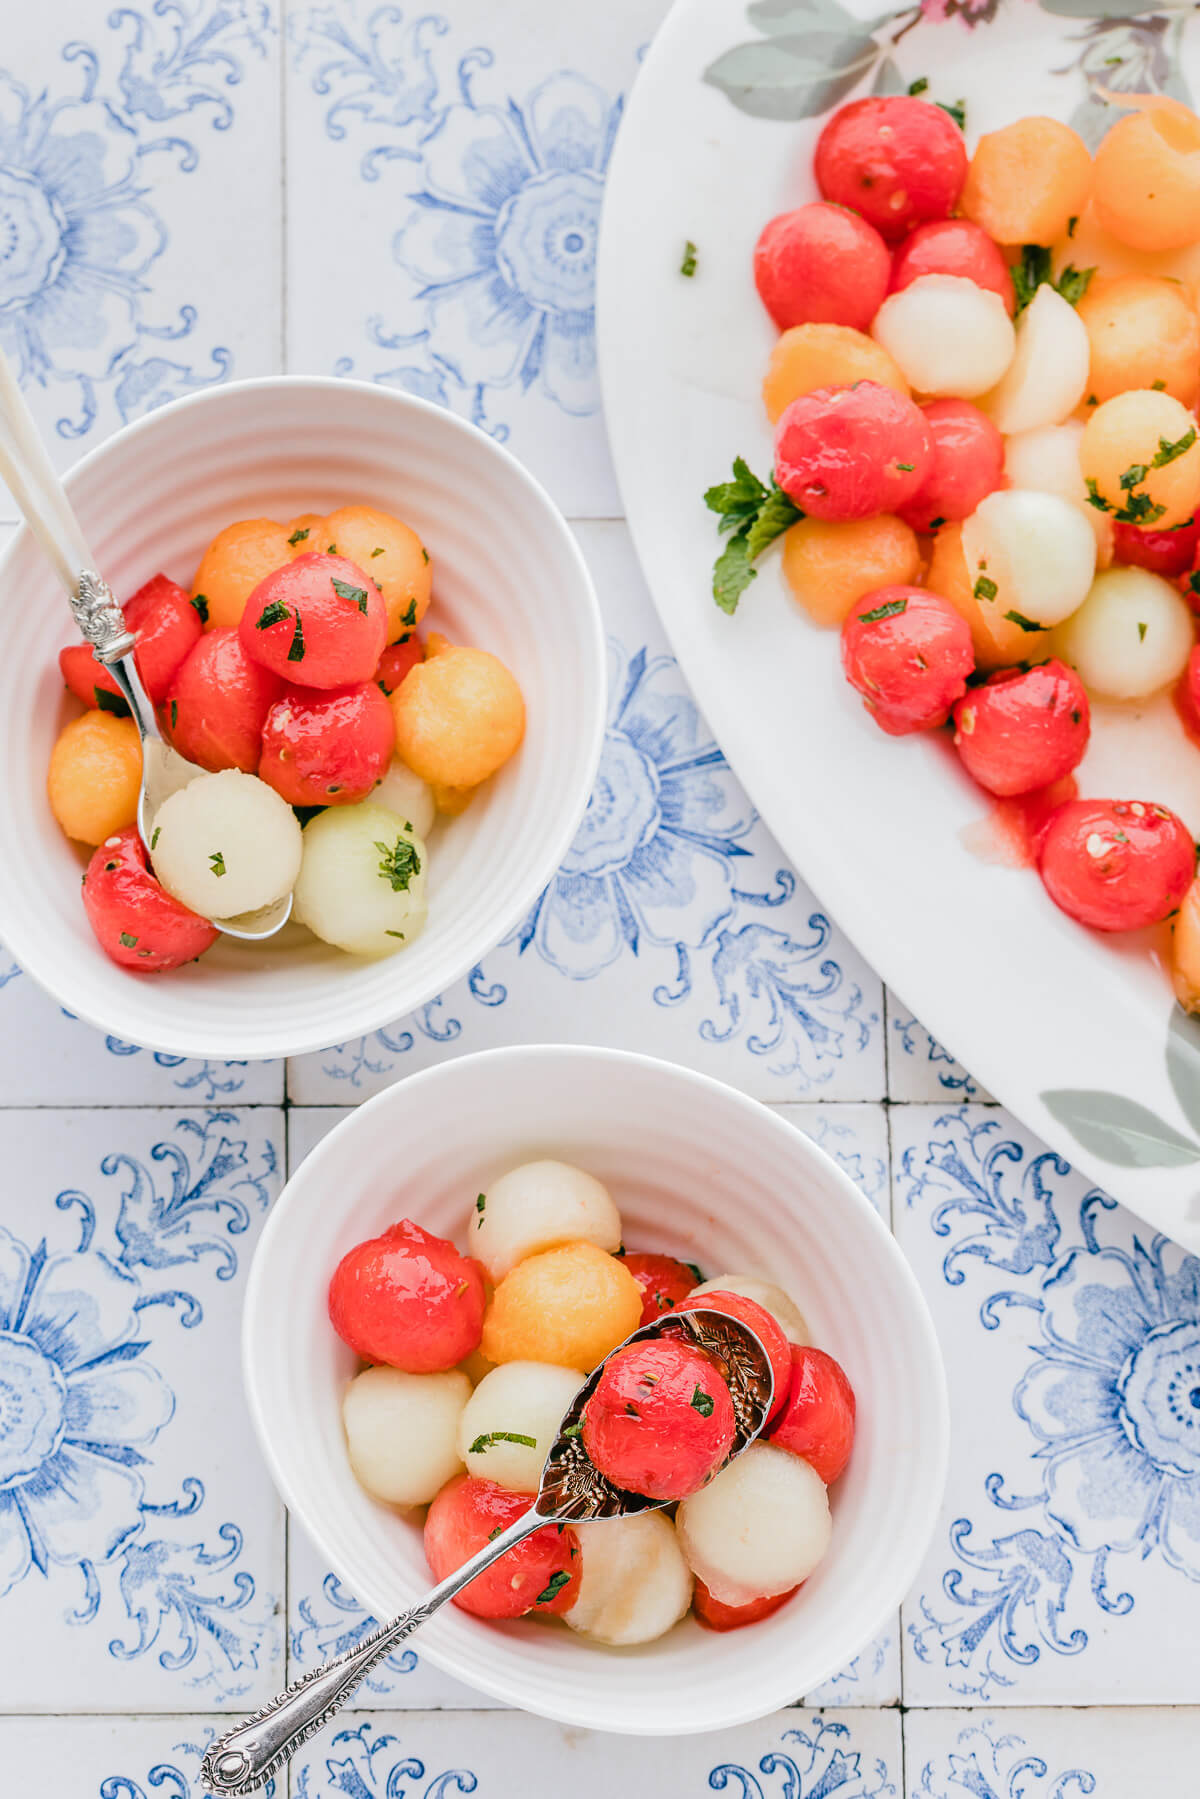 Serving bowls filled with multicoloured melon salad garnished with fresh mint.